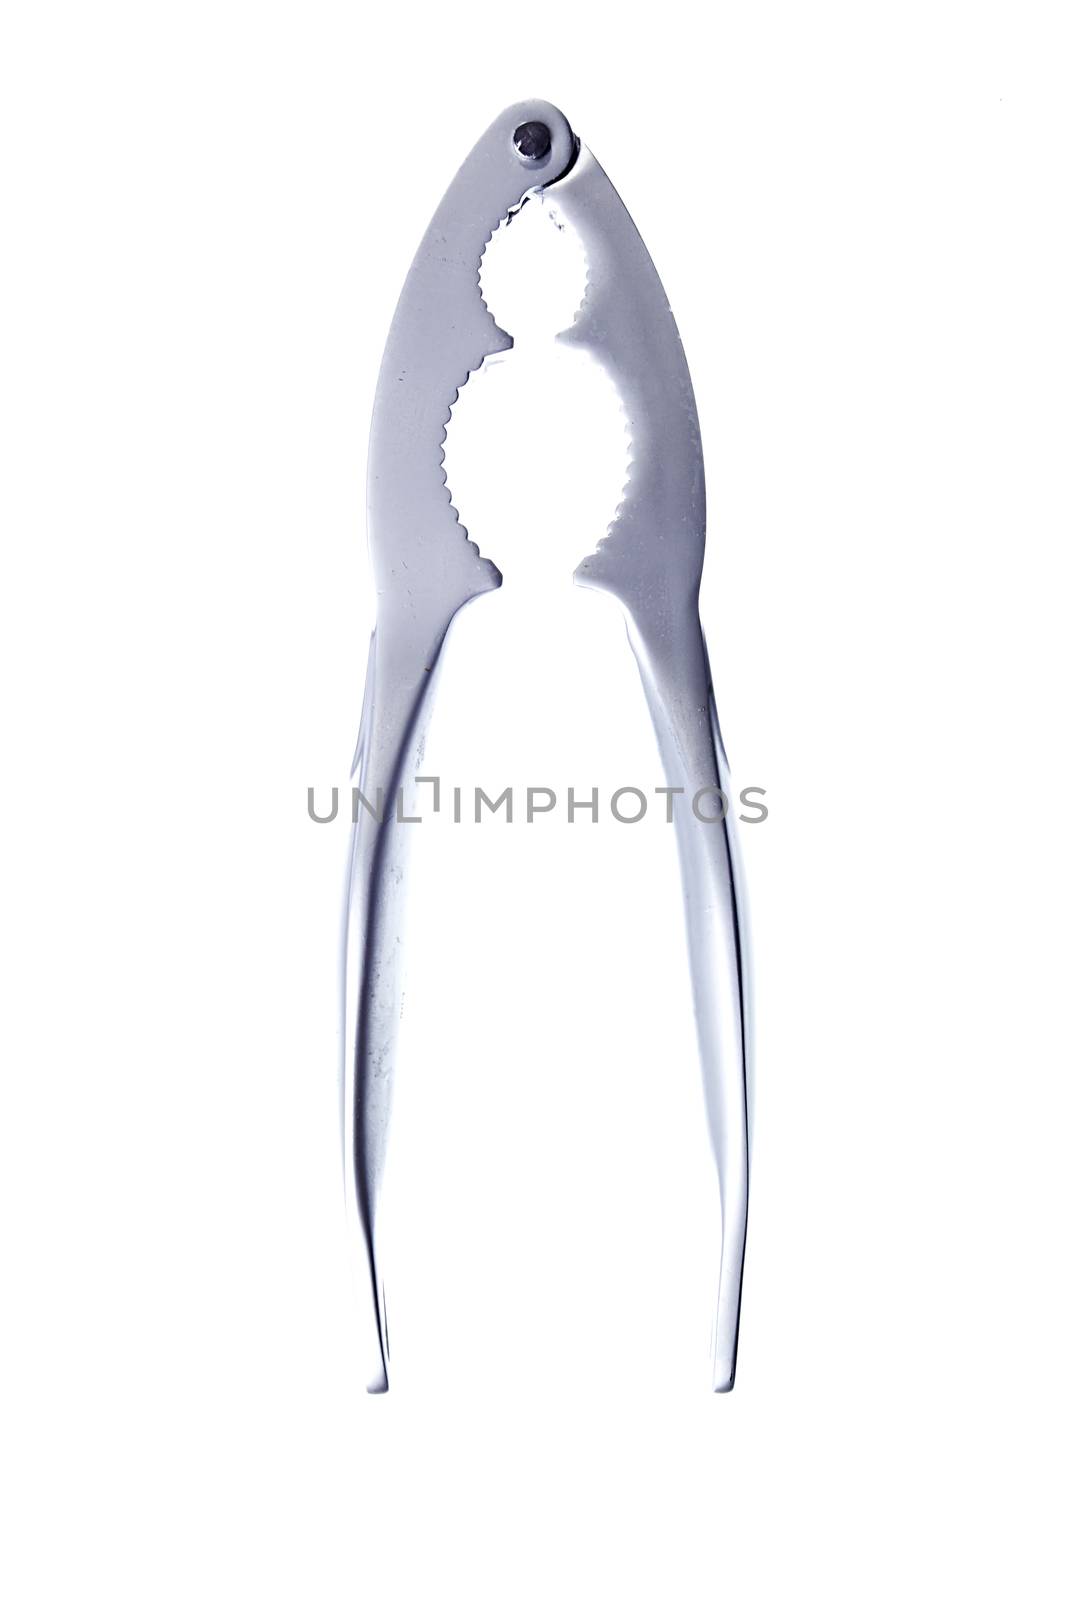 Steel nutcracker isolated on white background with clipping path